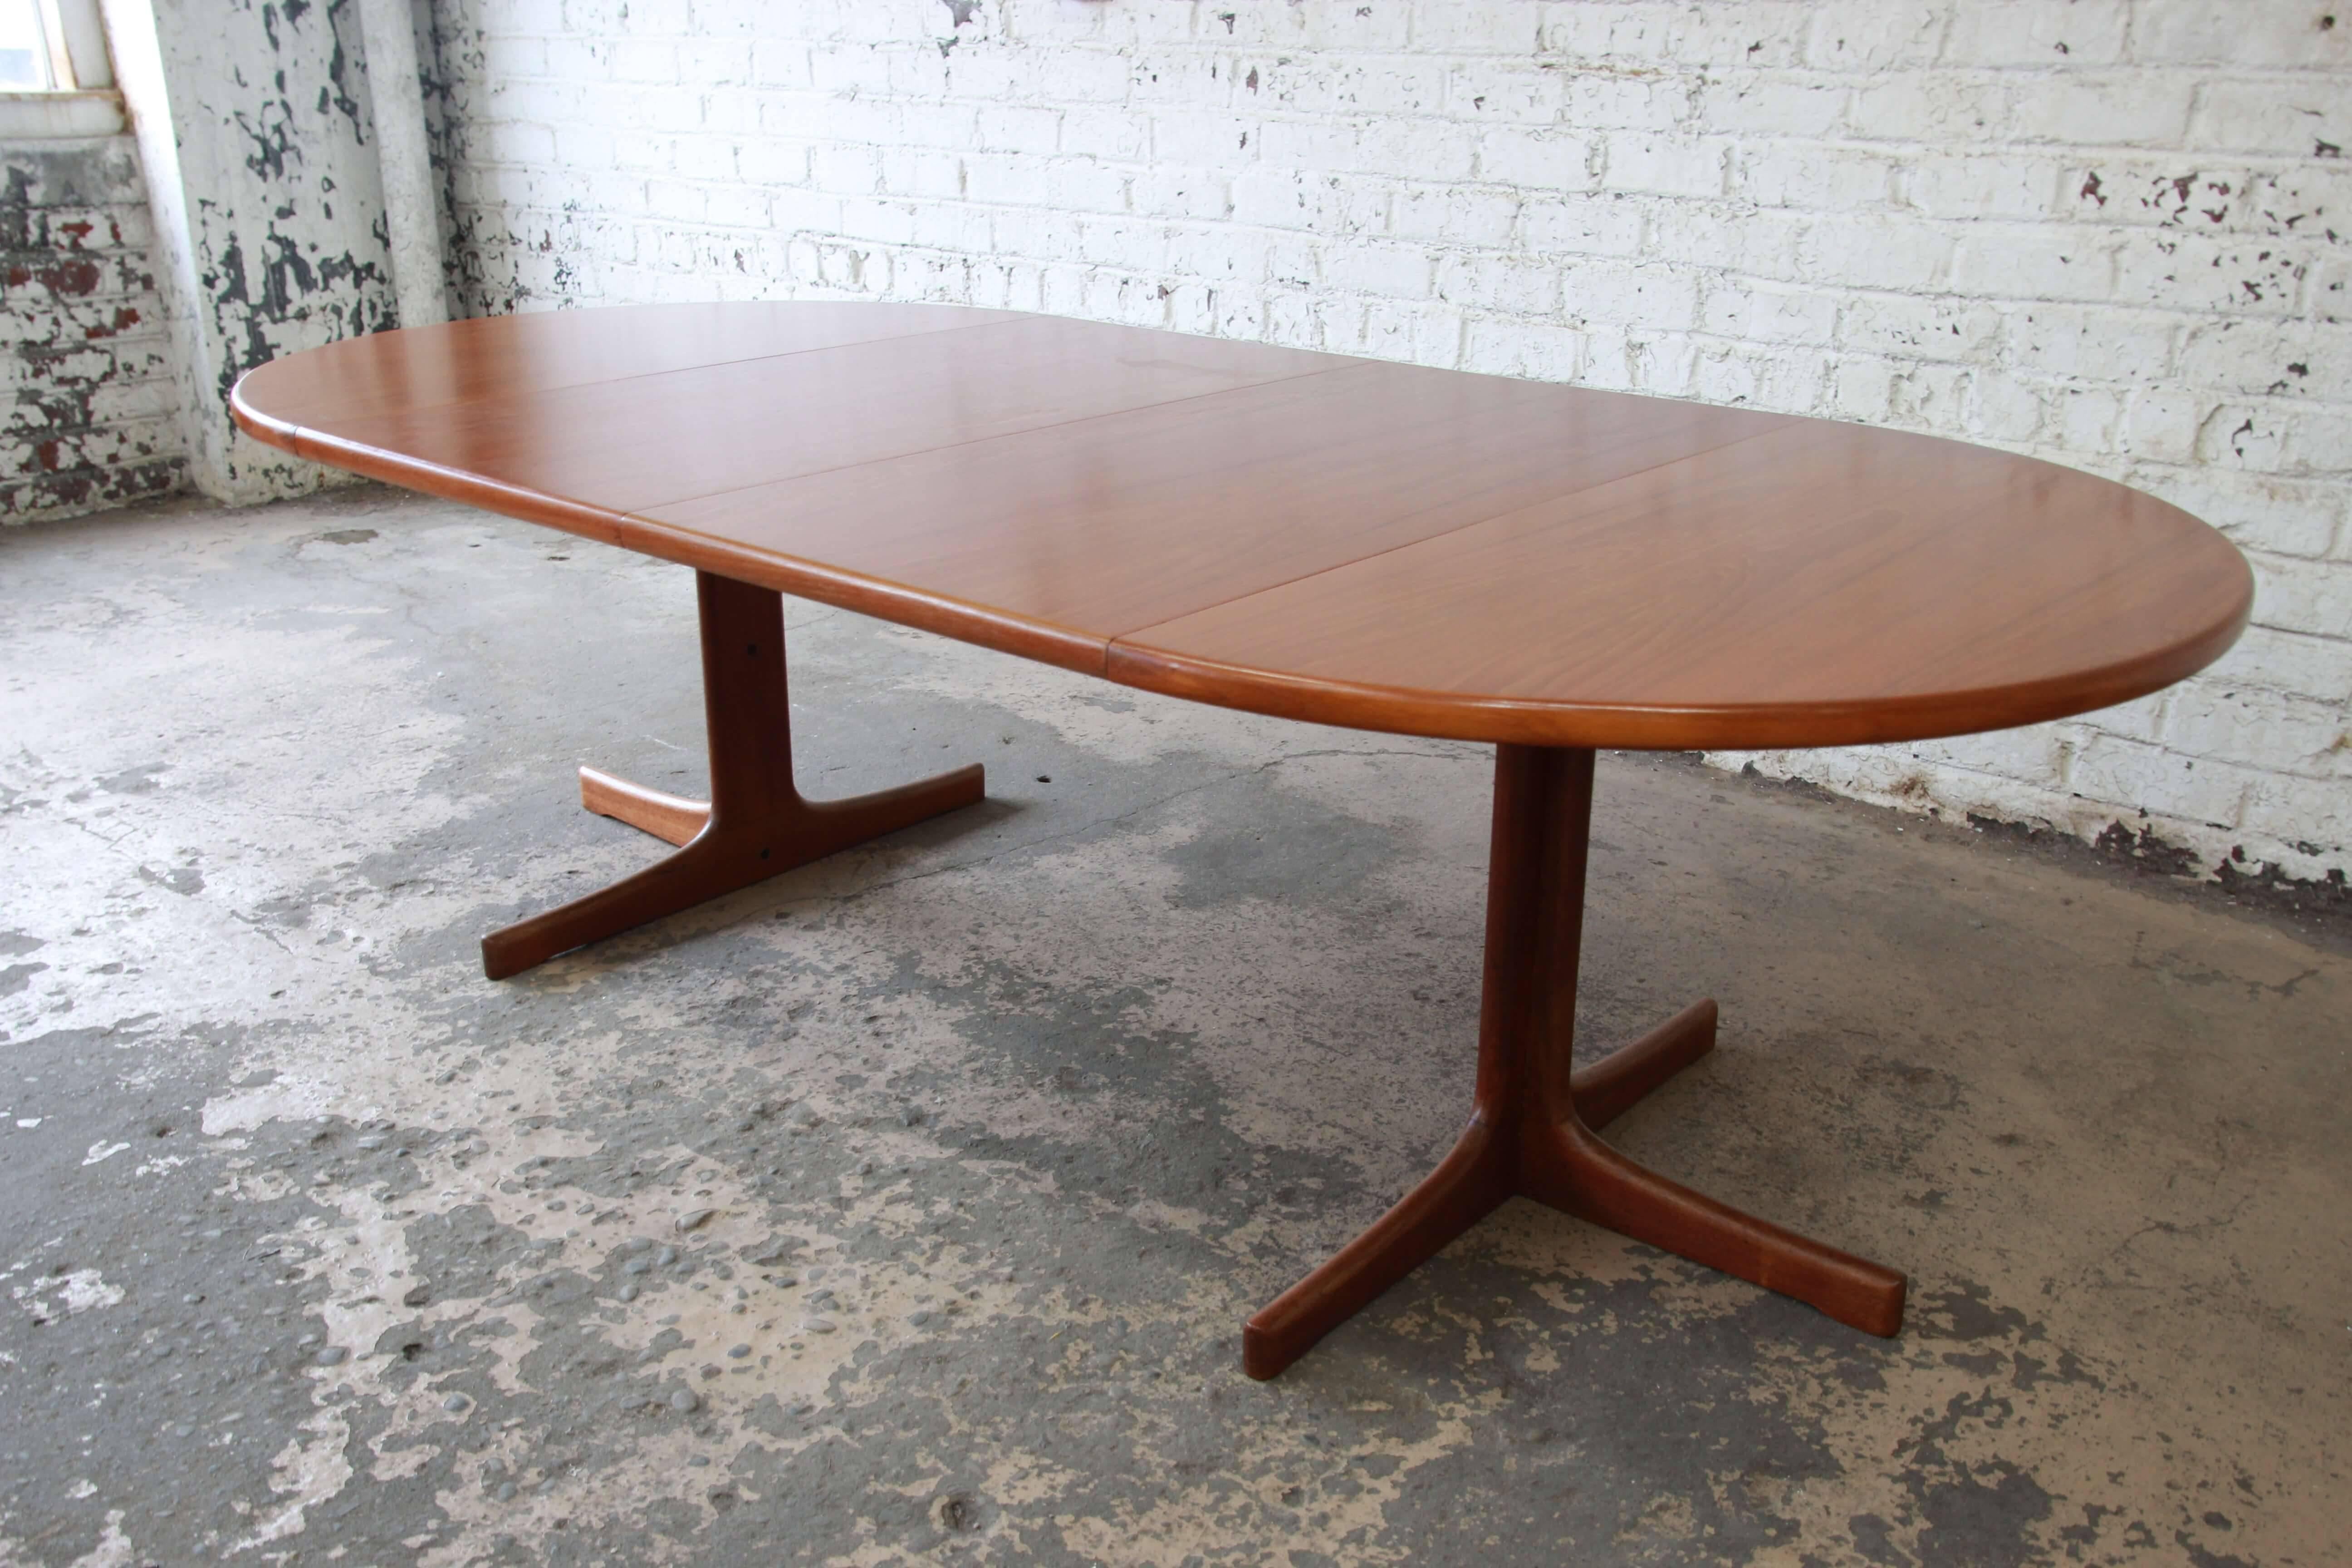 Offering a very nice Scandinavian extension dining table by Karl Ekselius for J.O. Carlsson. The round teak table expands to 94.75